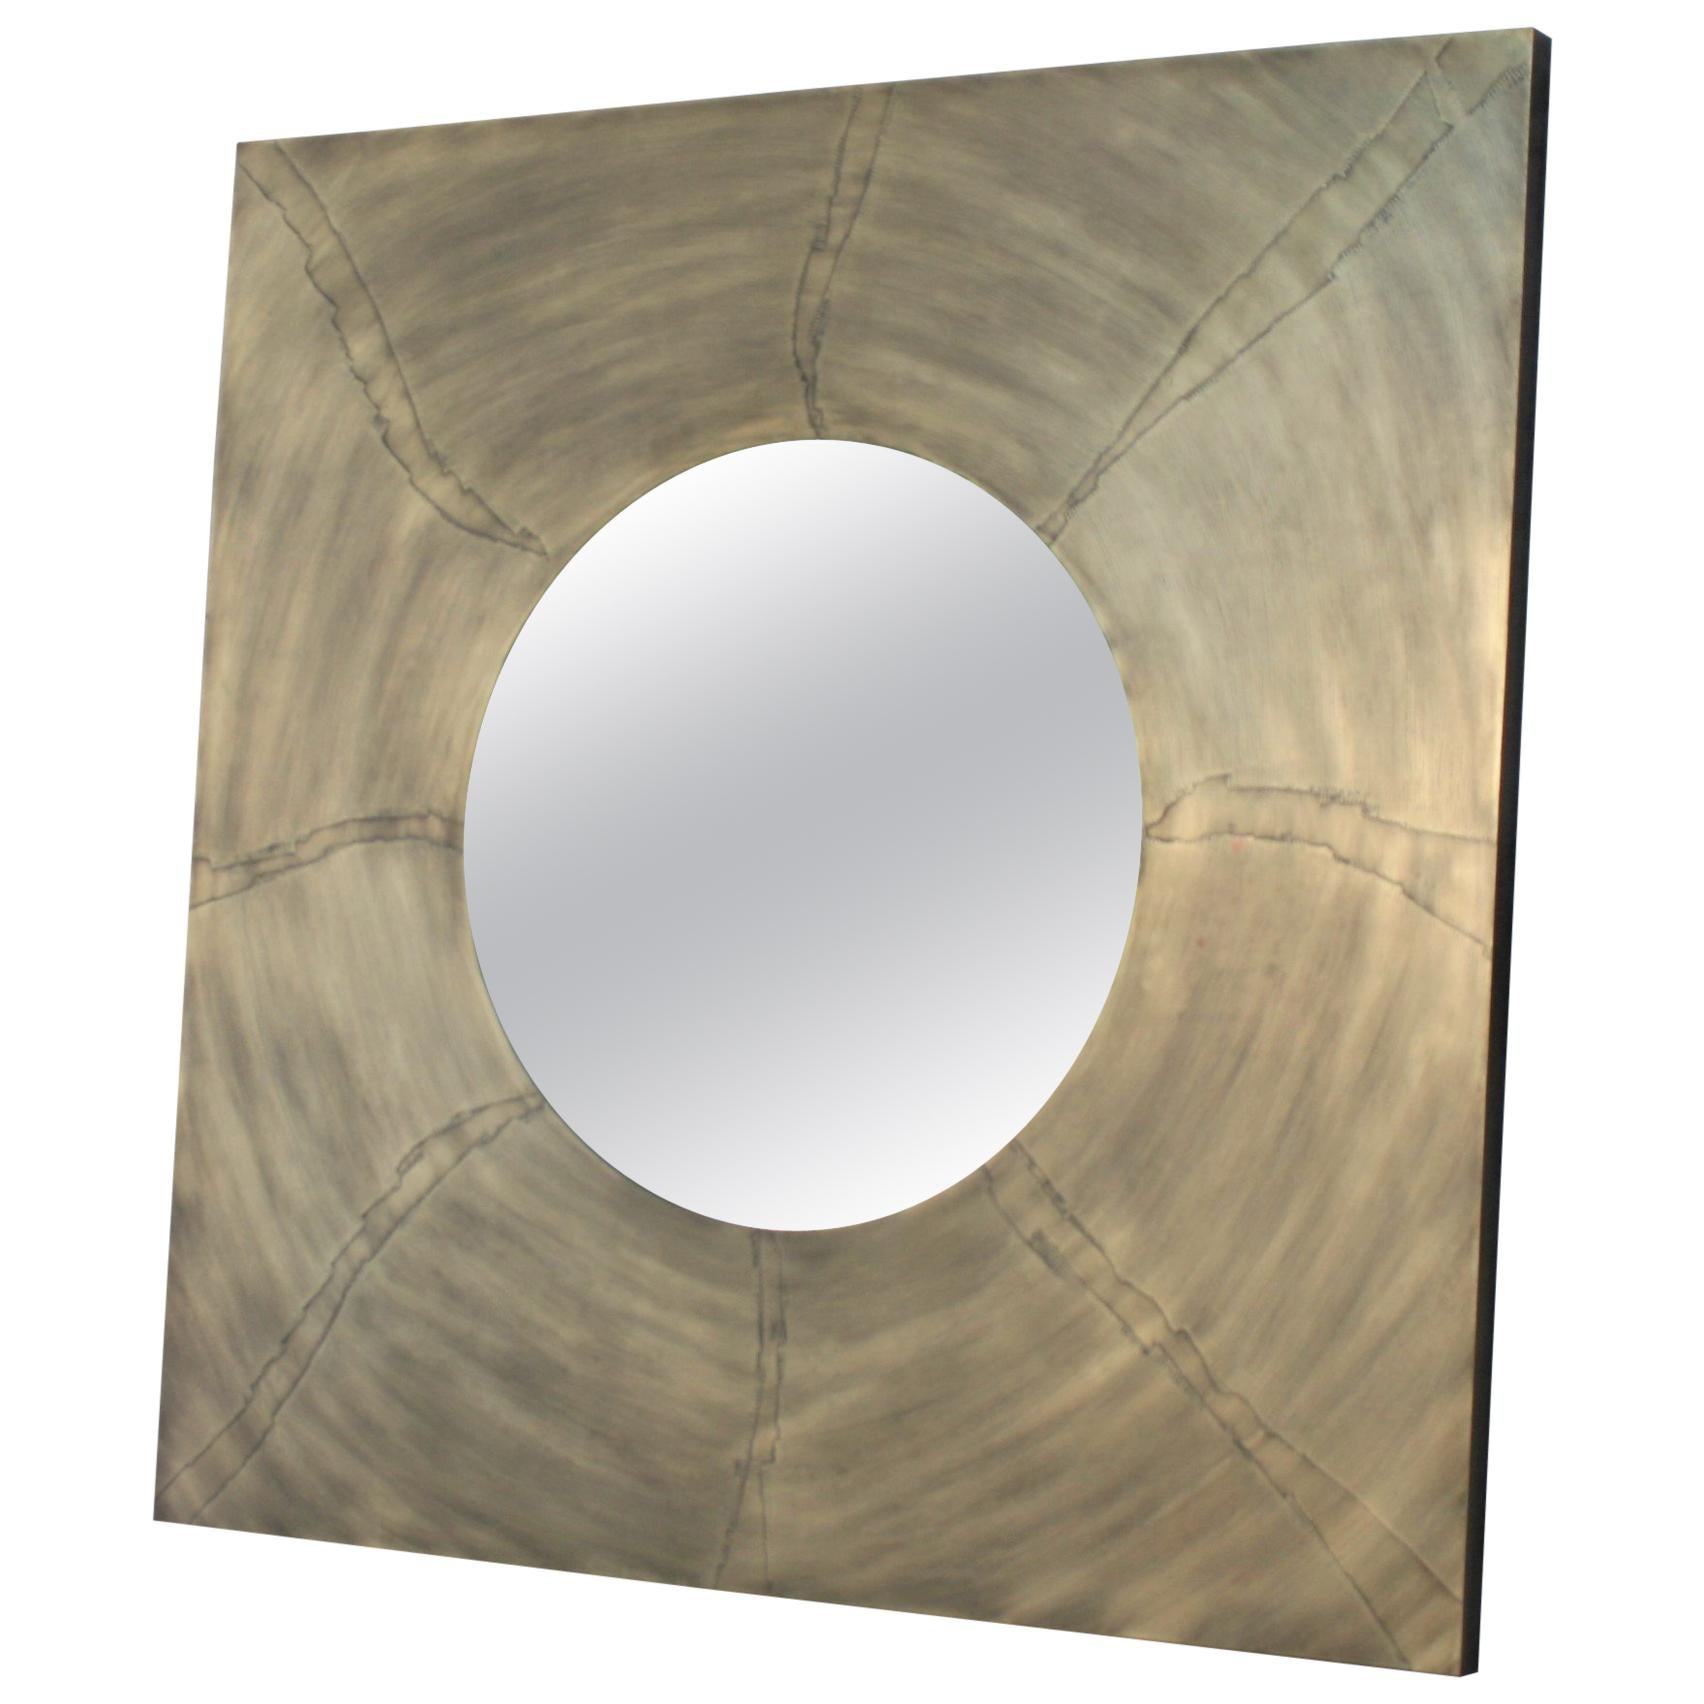 Artex Acid Ecthed Patinated Brass Mirror by Felix De Boussy for Studio Belgali For Sale